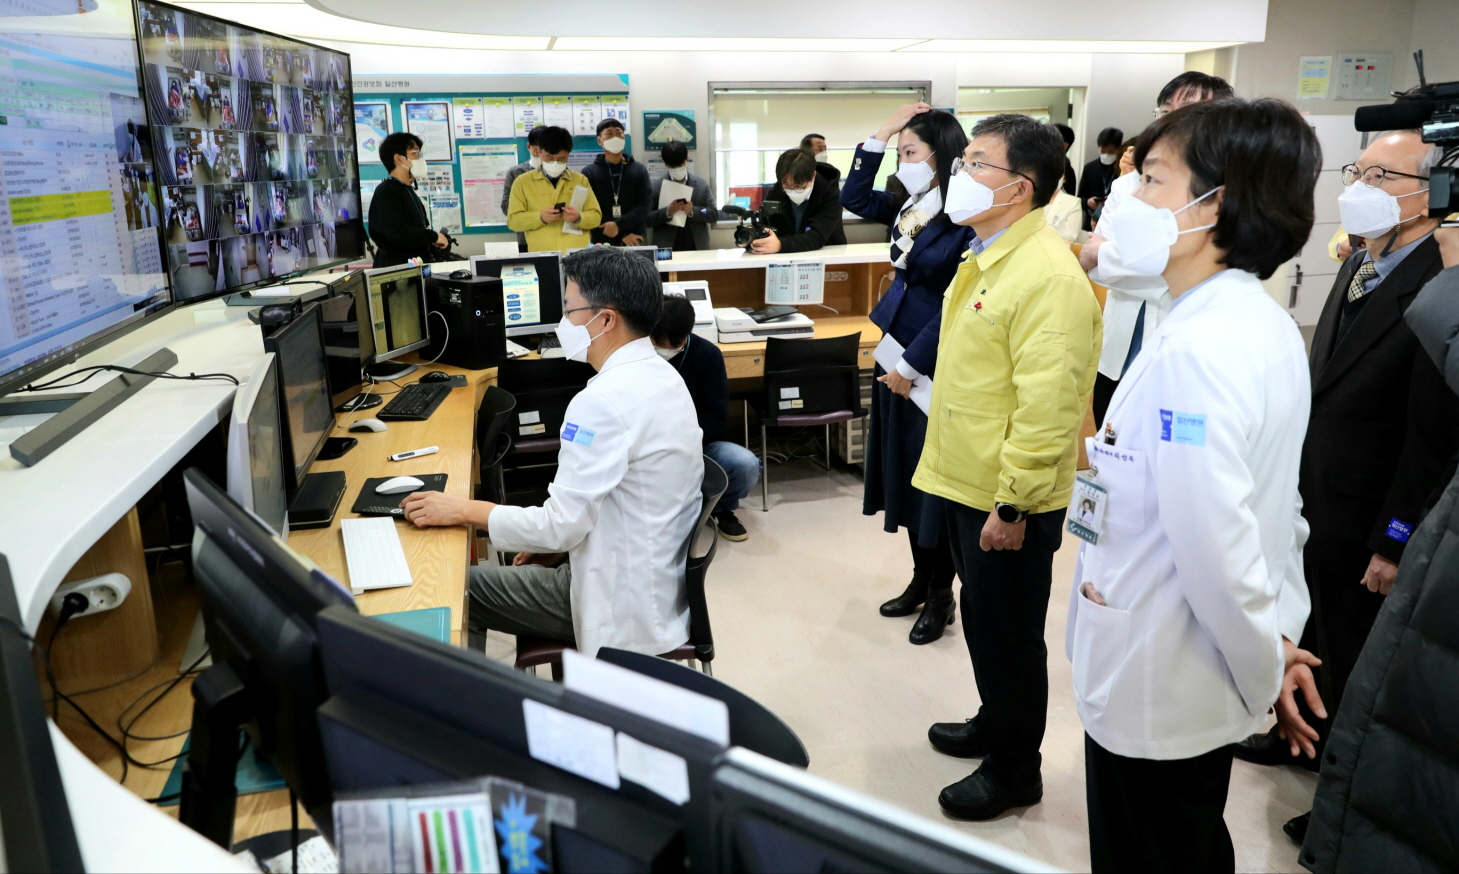 Minister Kwon Checks Hospital Networks in North Gyeonggi for COVID-19 Treatment (January 3) 사진15